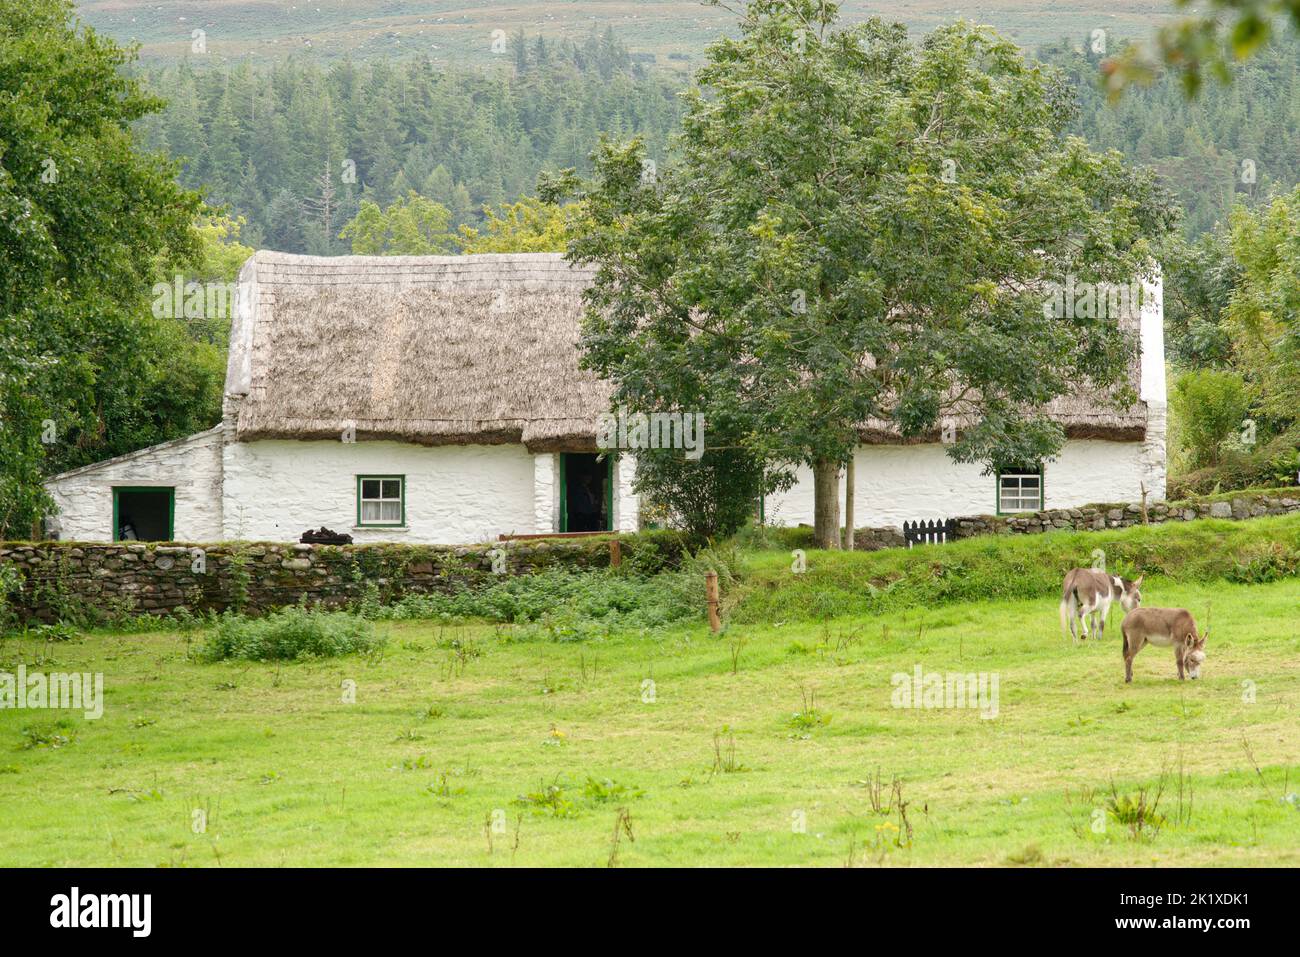 Thatched crofters cottage in Ireland with two donkeys in filed in front. Stock Photo